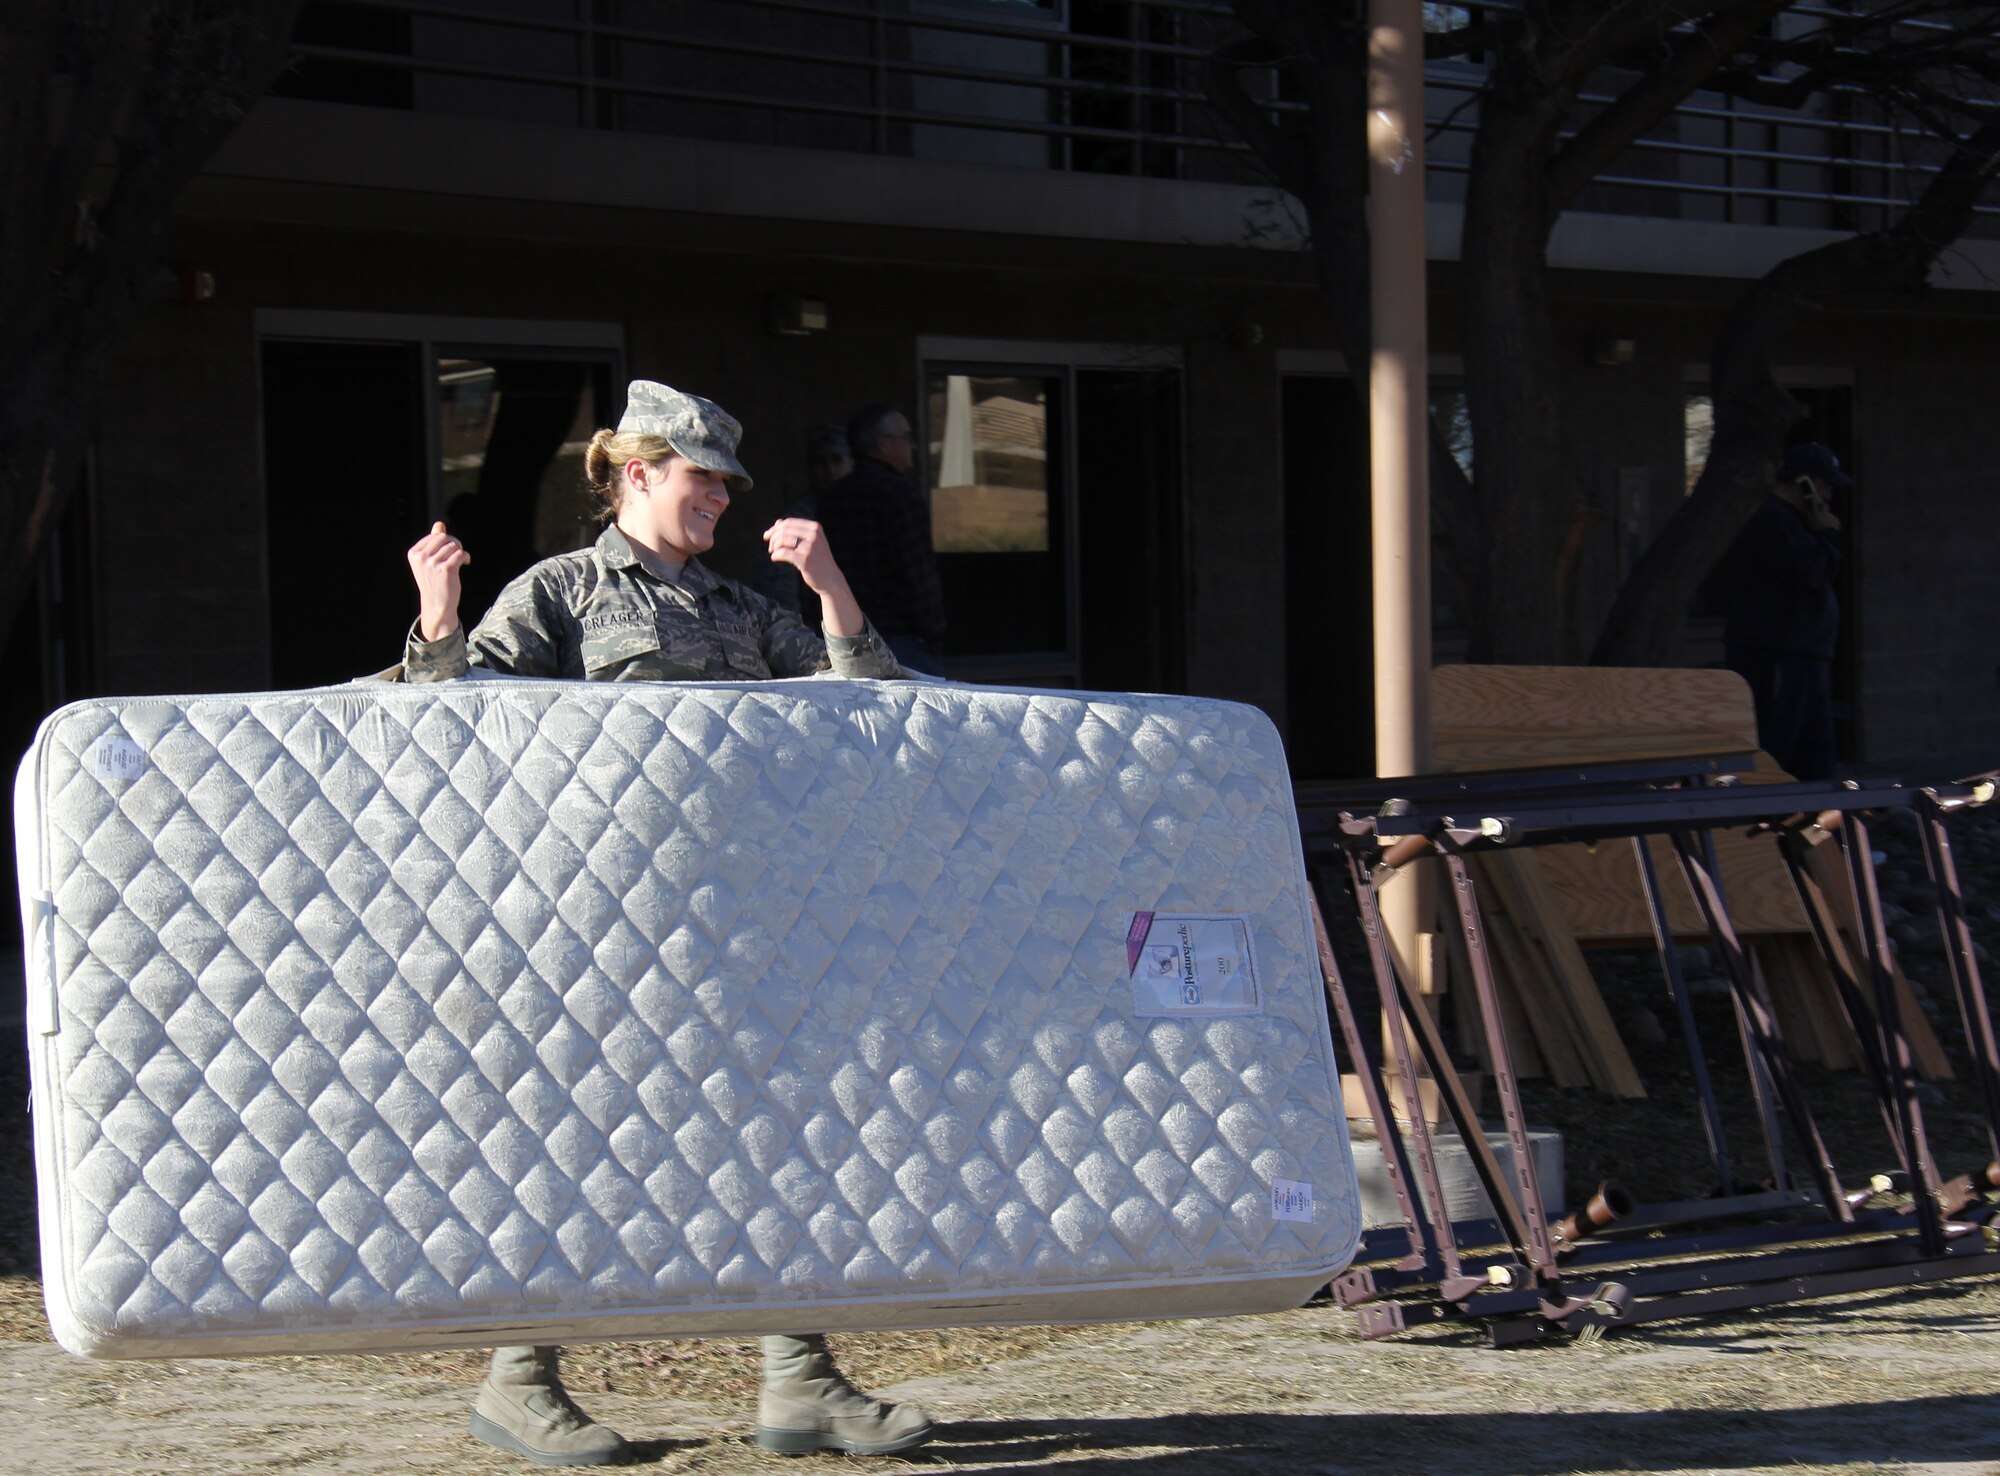 Senior Airman Macy Creager, 355th Contracing Squadron, carries a dorm mattress that will be donated to homeless veterans. (Courtesy Photo)